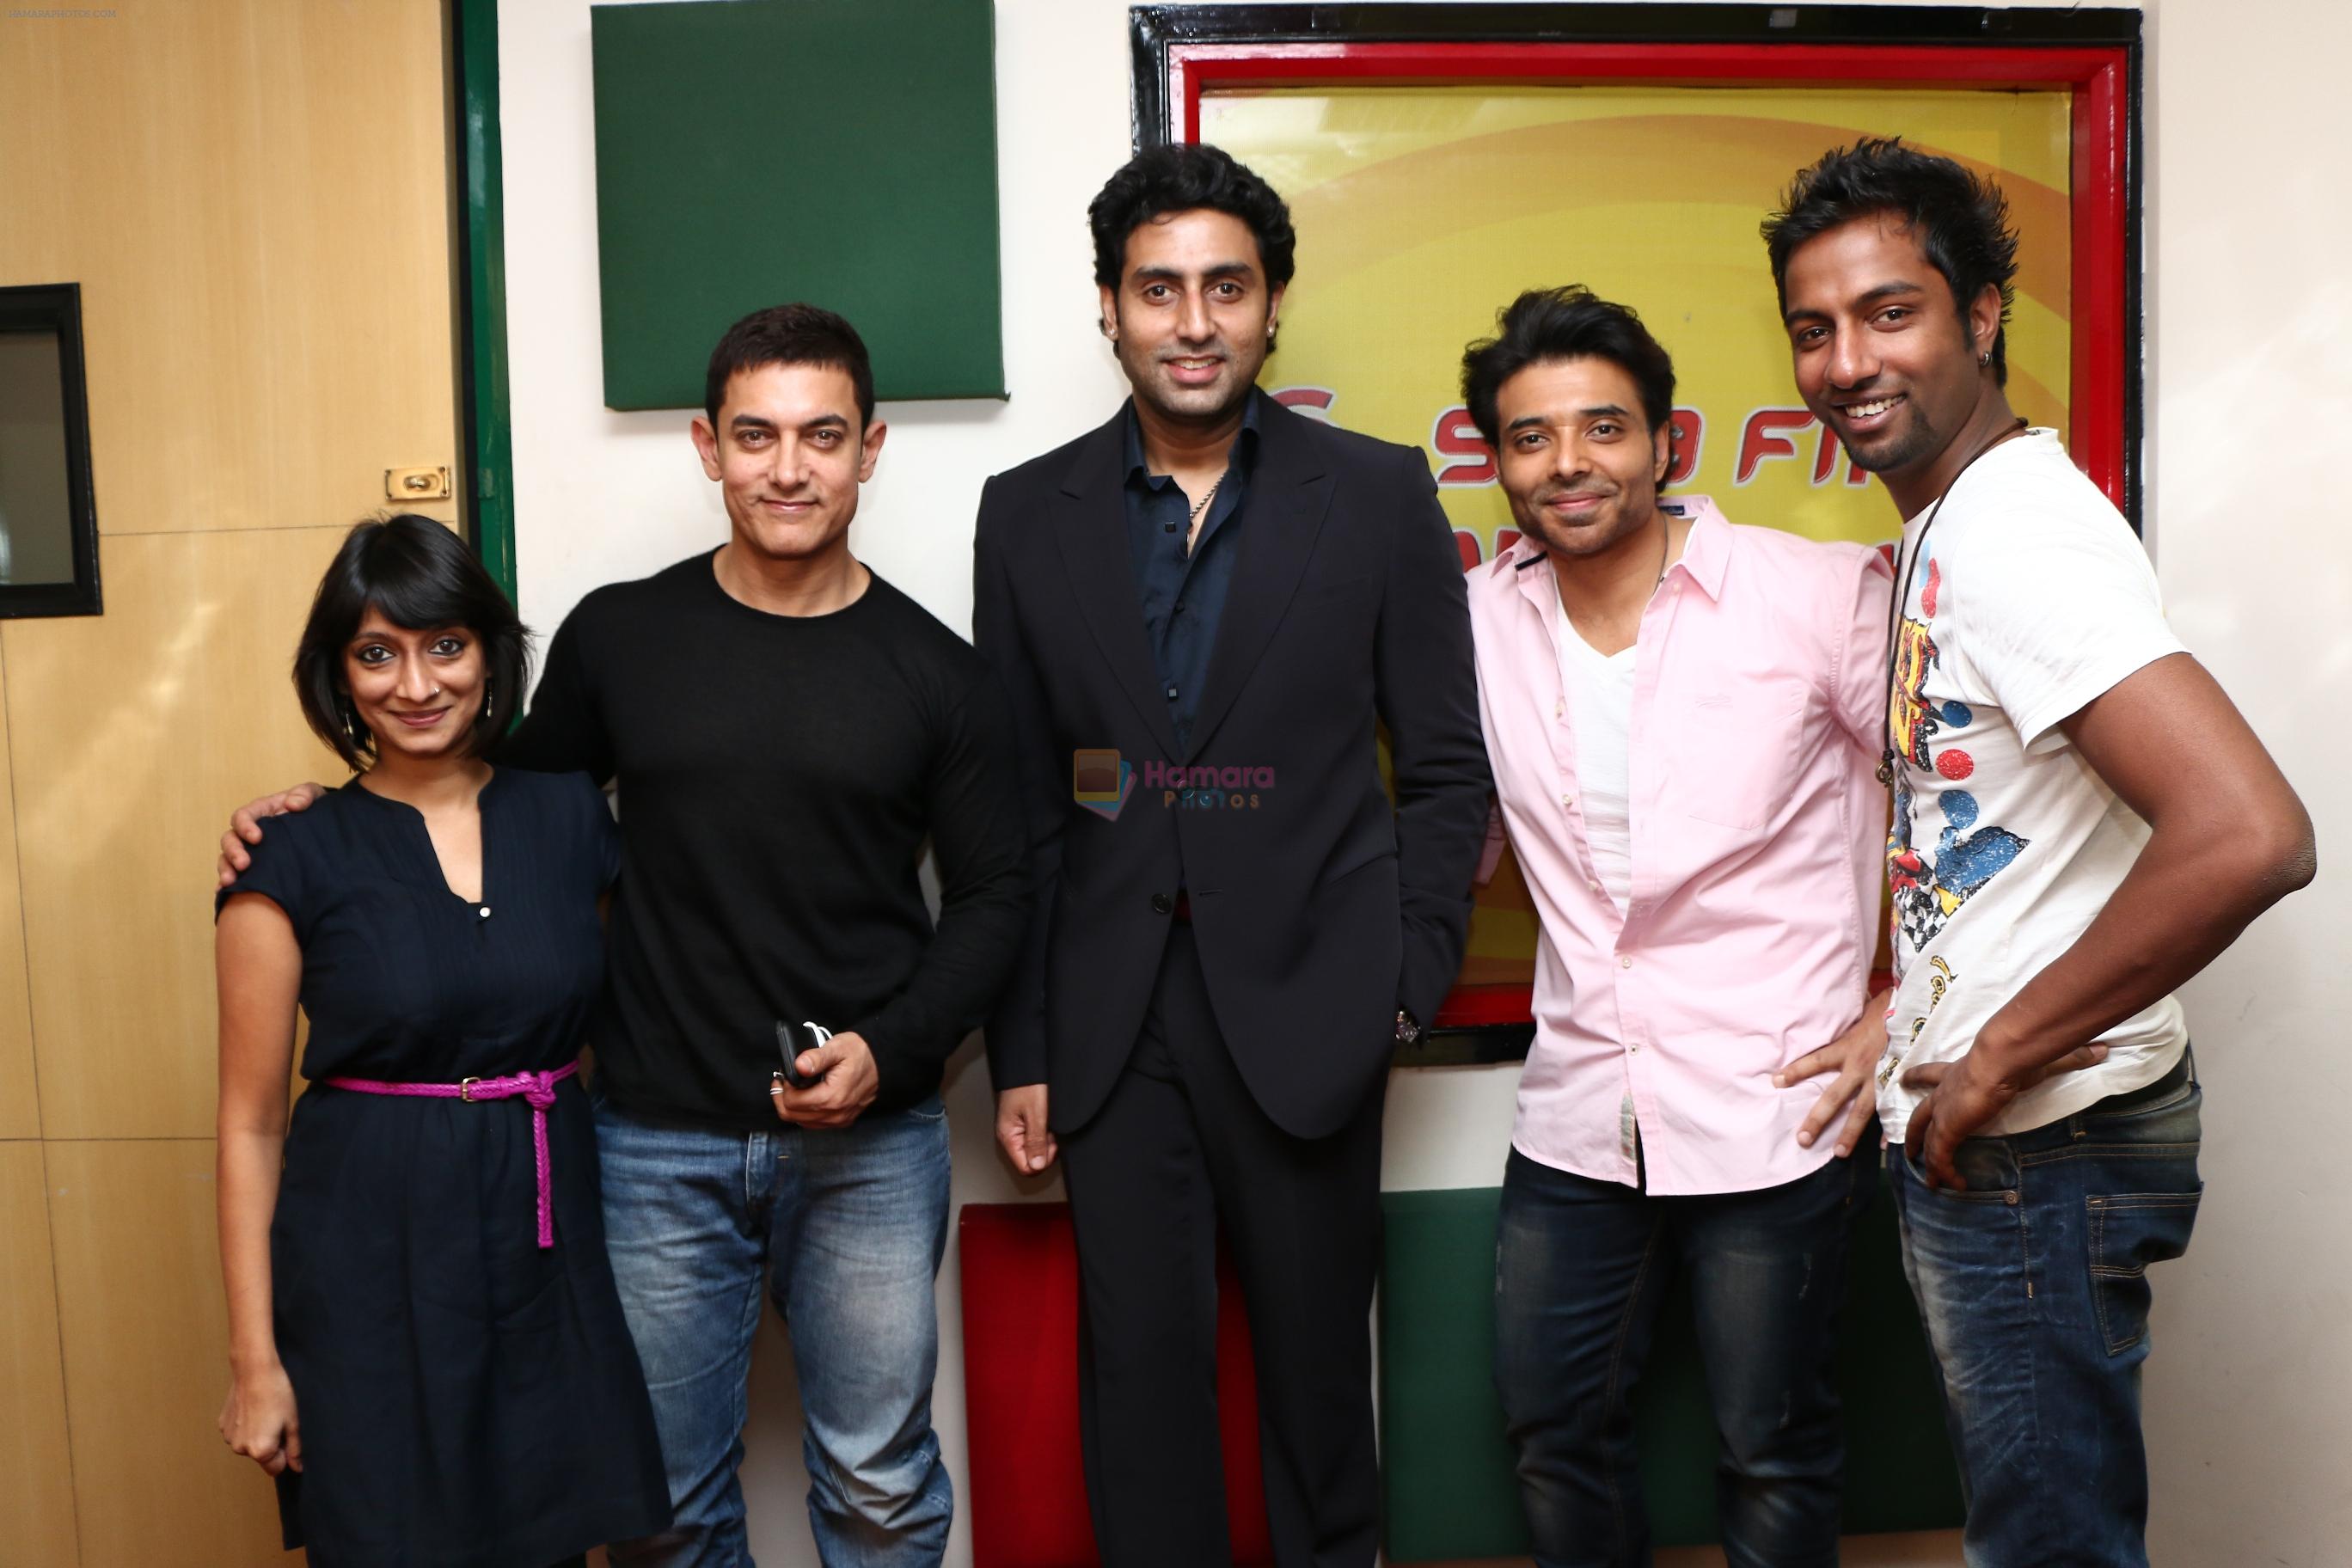 RJ Meera and RJ Suren of Sunset Samosa with Aamir Khan, Abhishekh Bachchan and Uday Chopra at Radio Mirchi studio for promotion of Their upcoming movie Dhoom 3